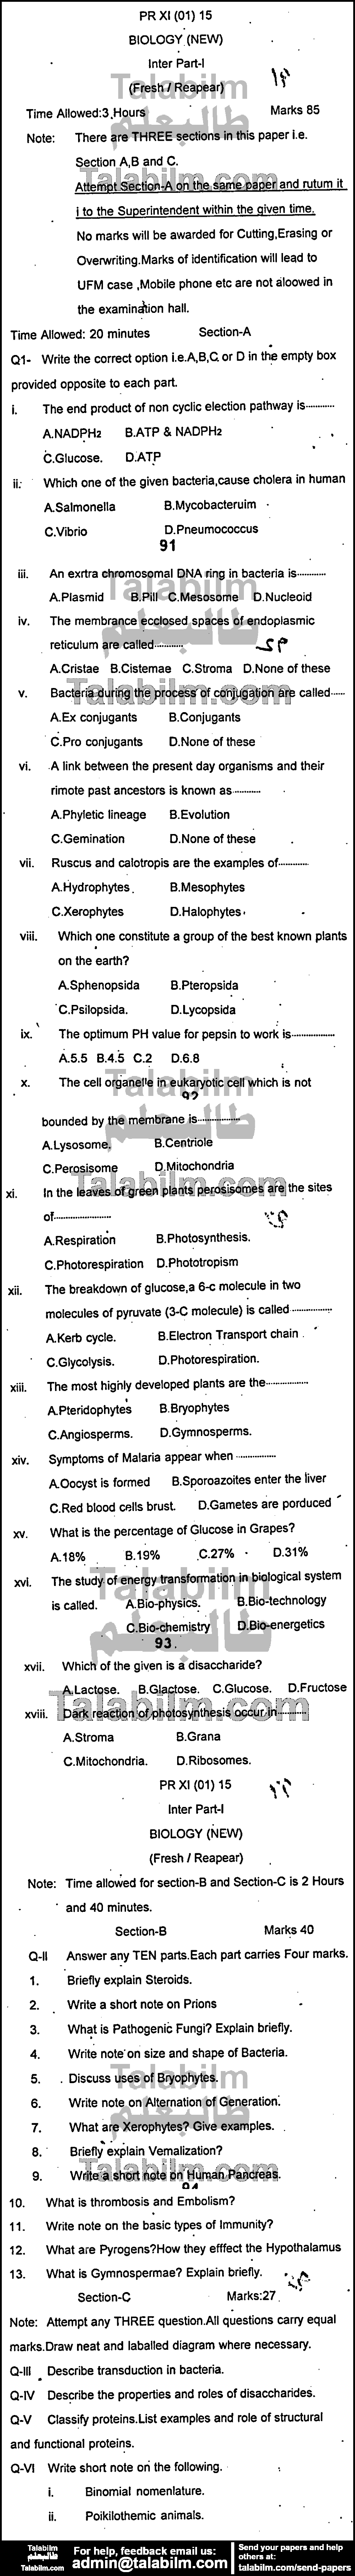 Biology 0 past paper for Group-I 2015